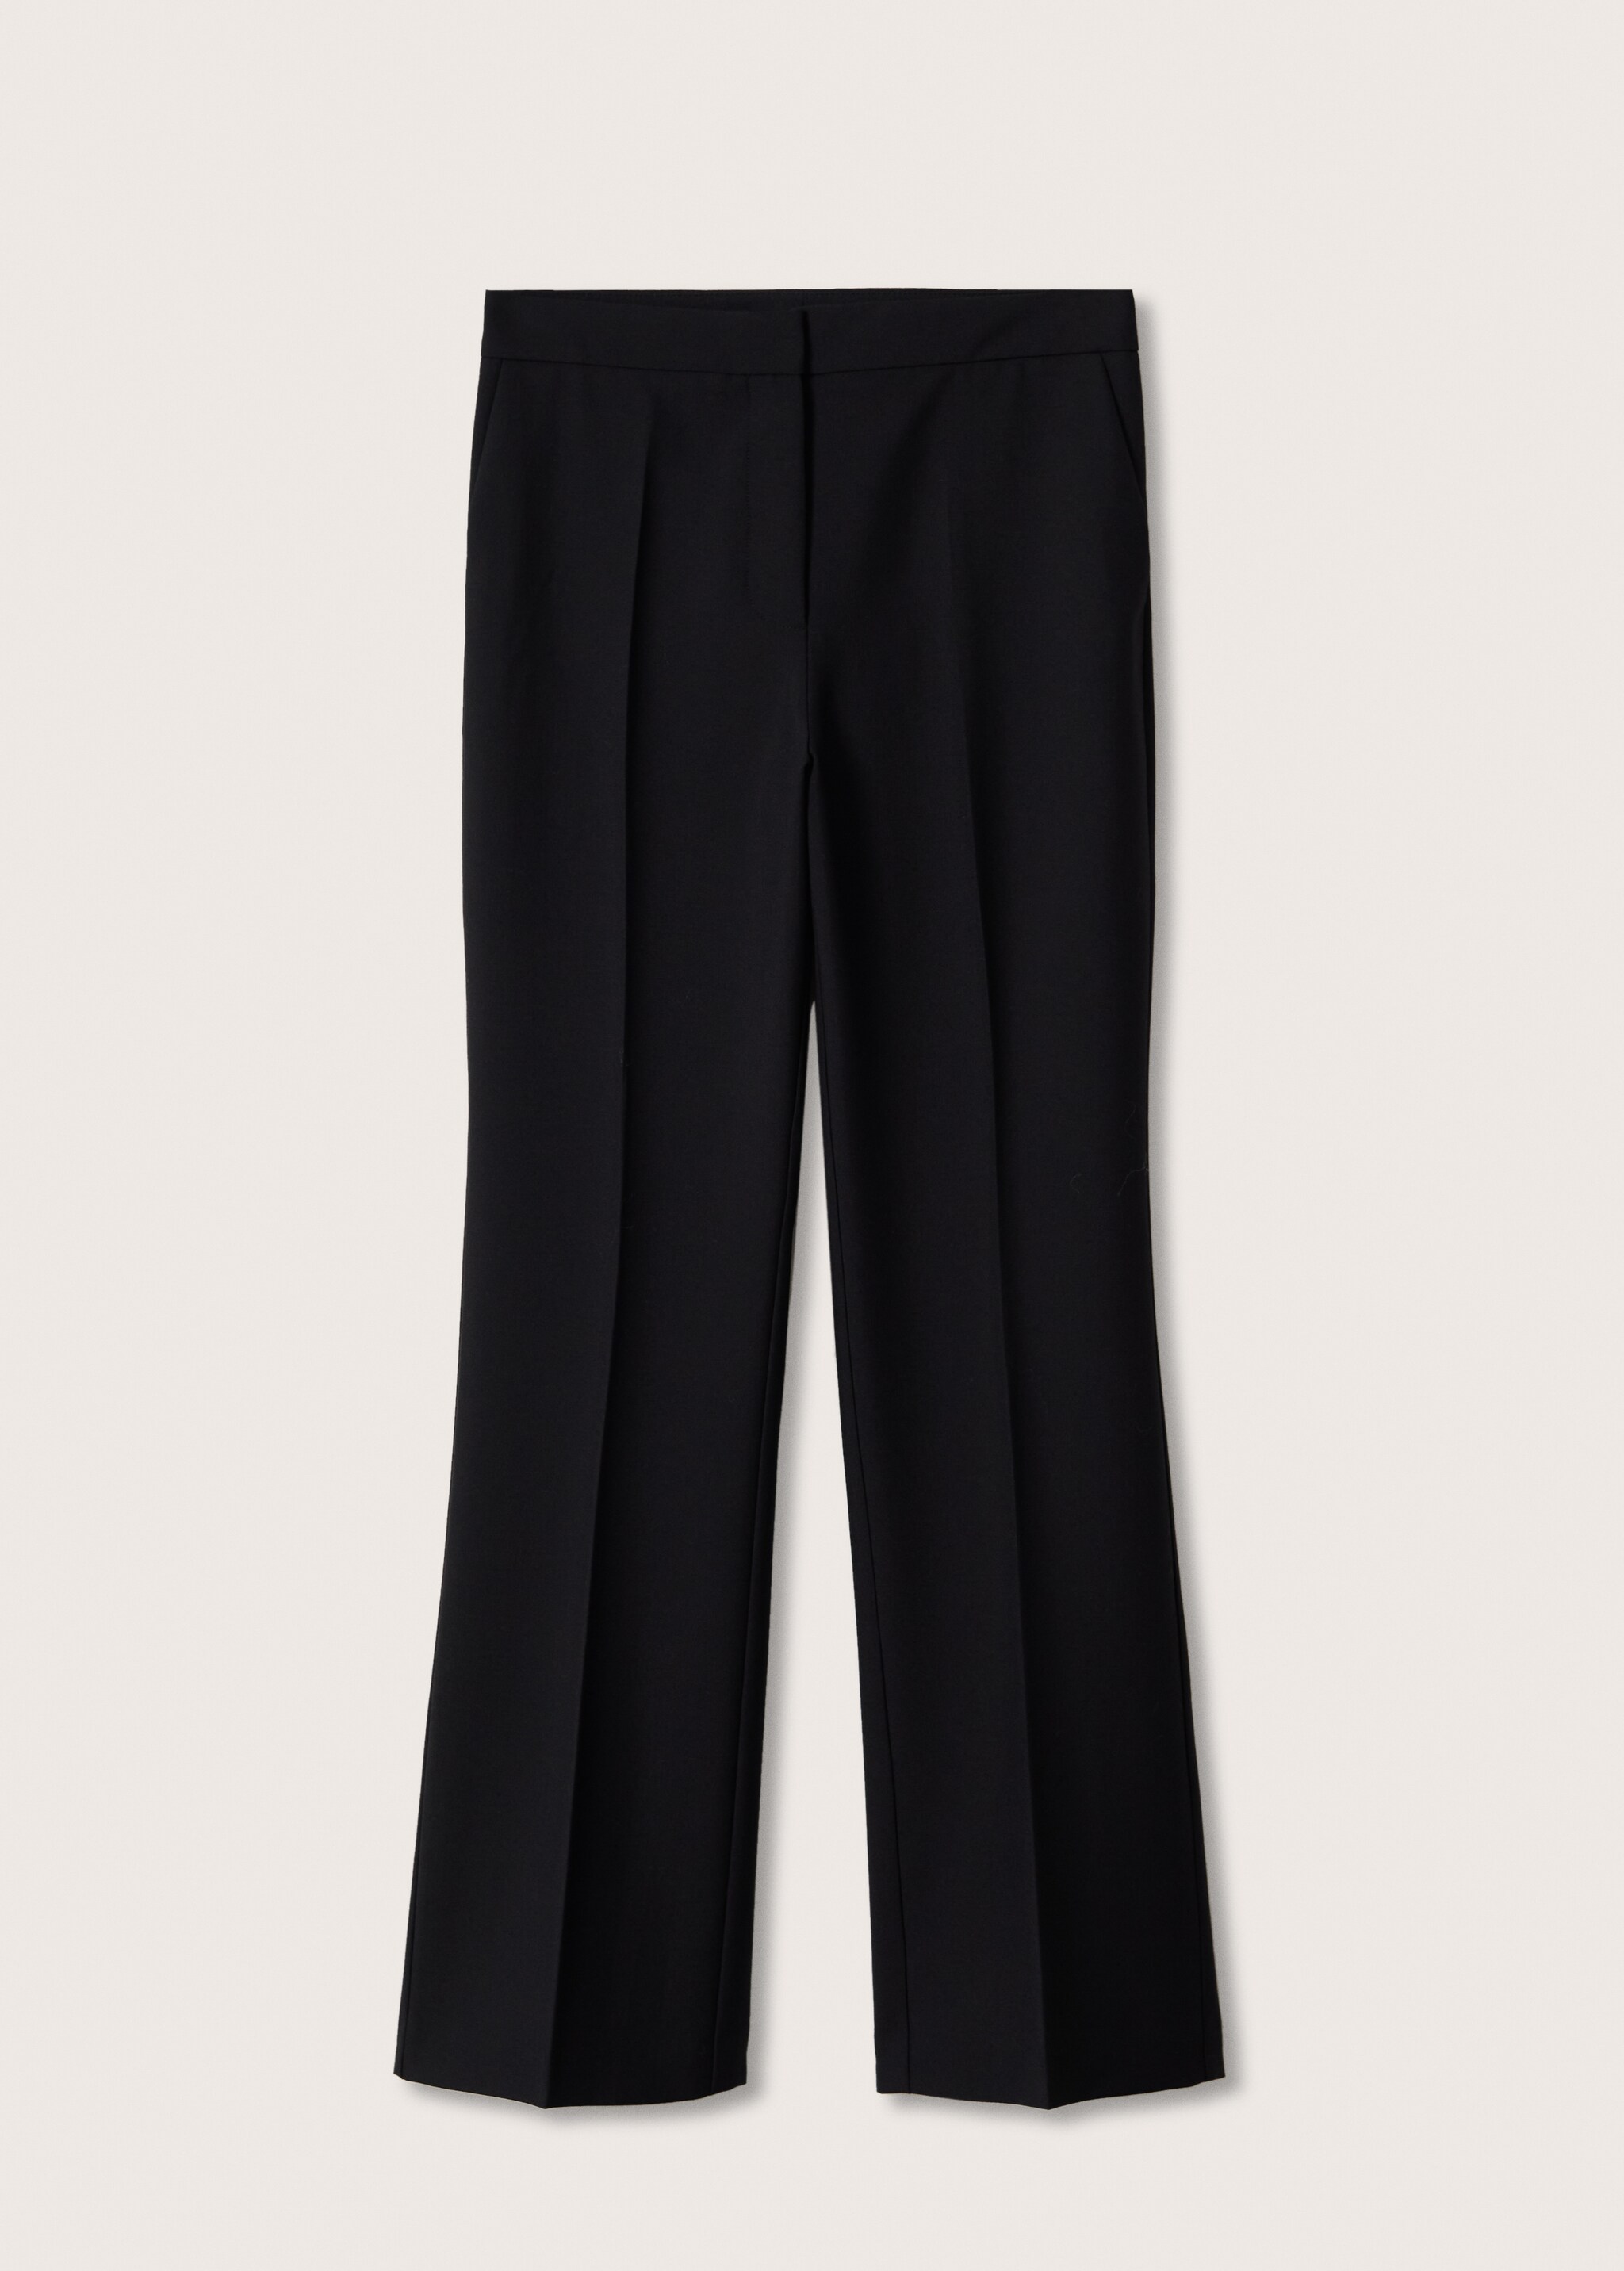 Wool suit trousers - Article without model